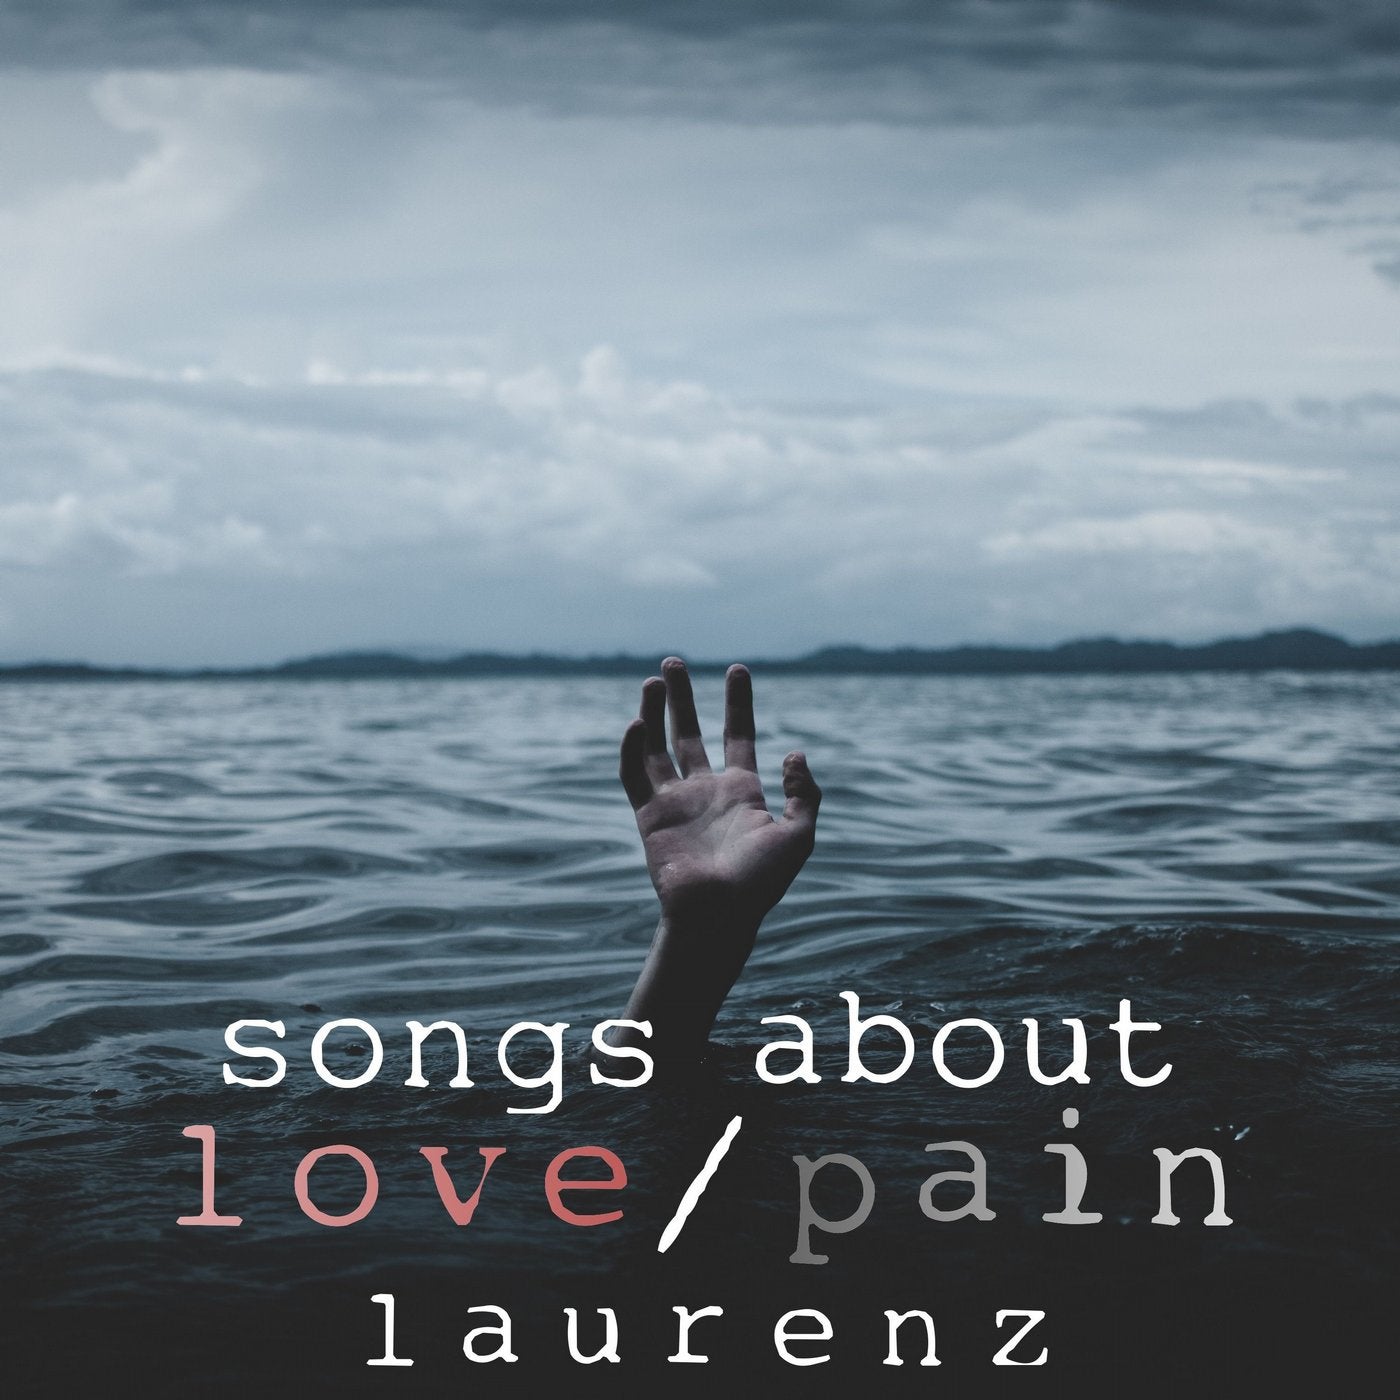 Songs About Love/Pain